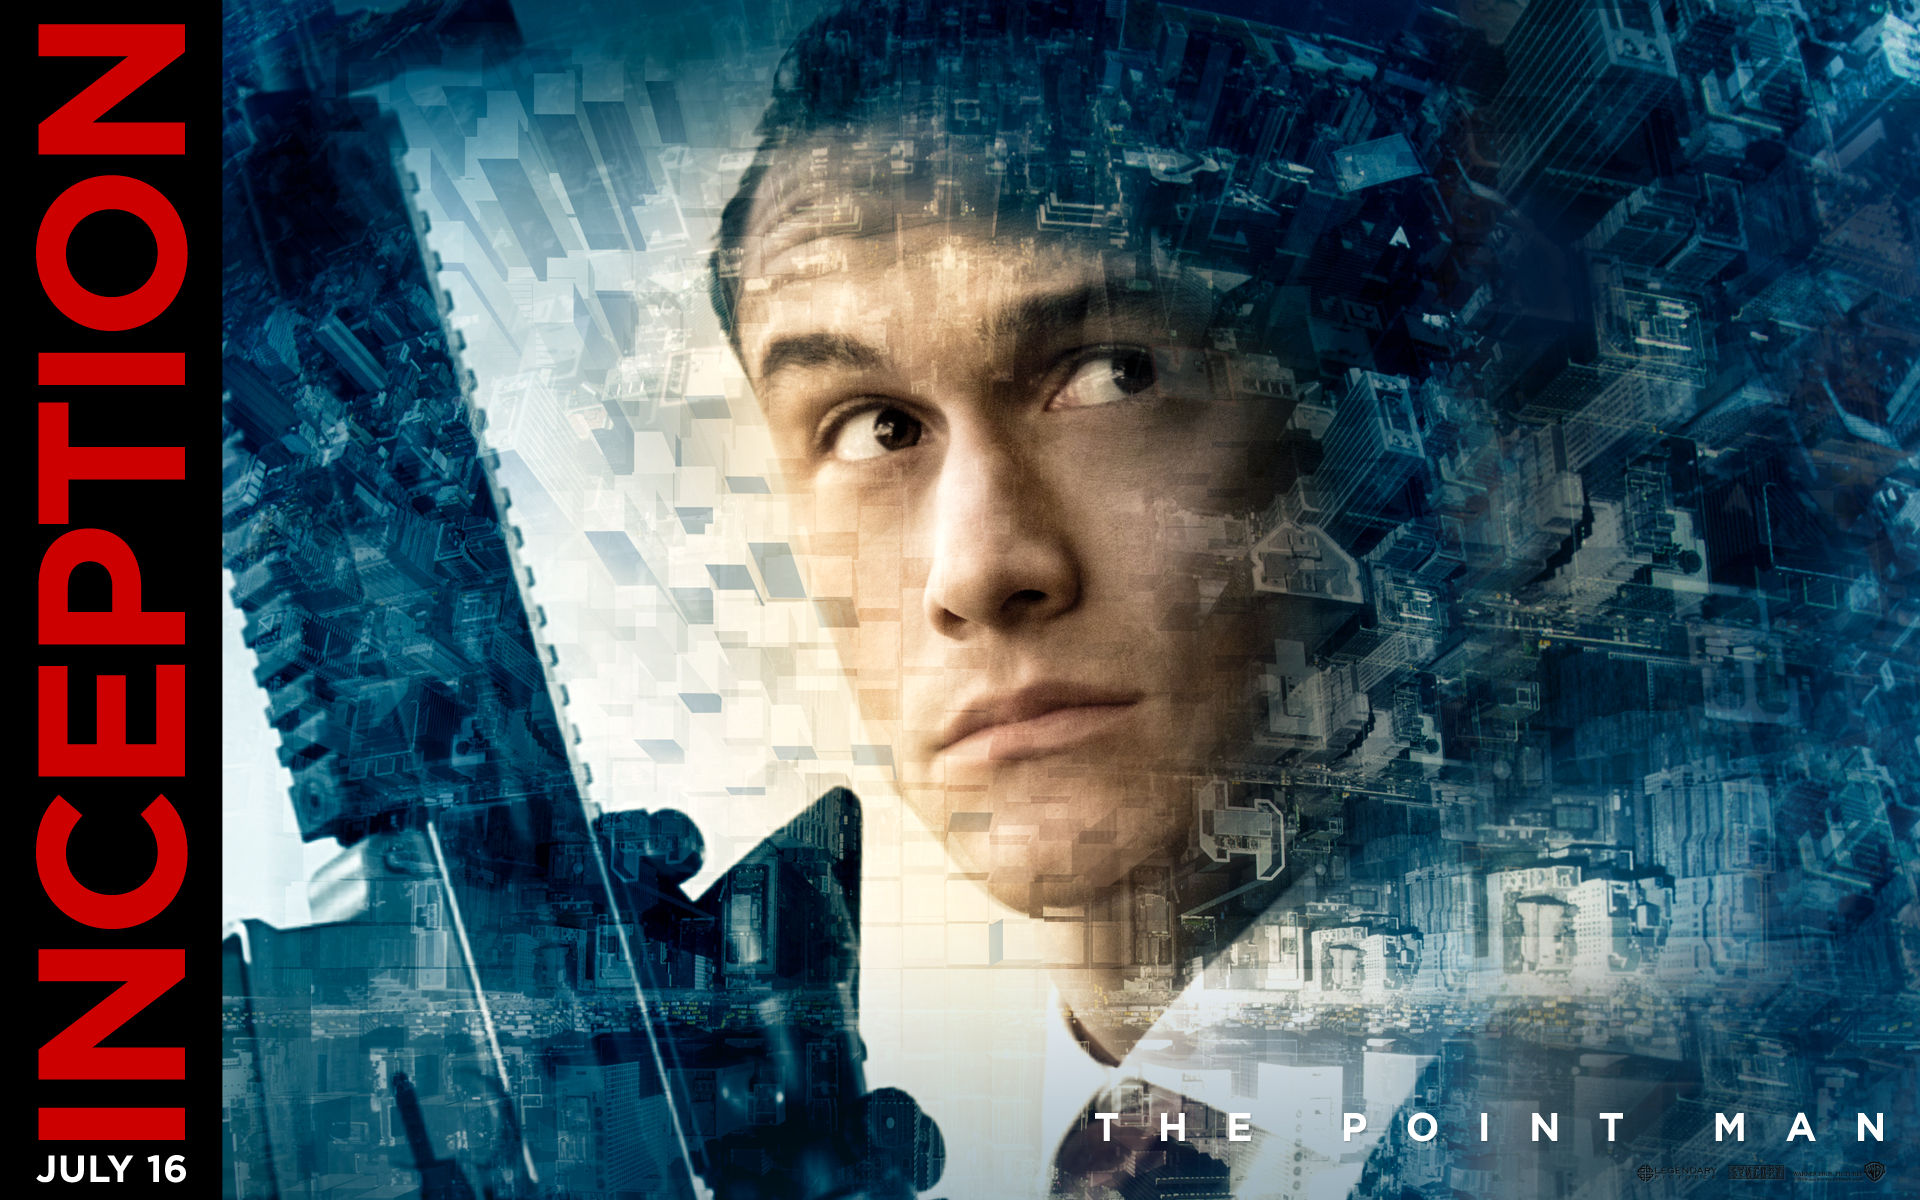 Download HQ the point man Inception wallpaper / 1920x1200